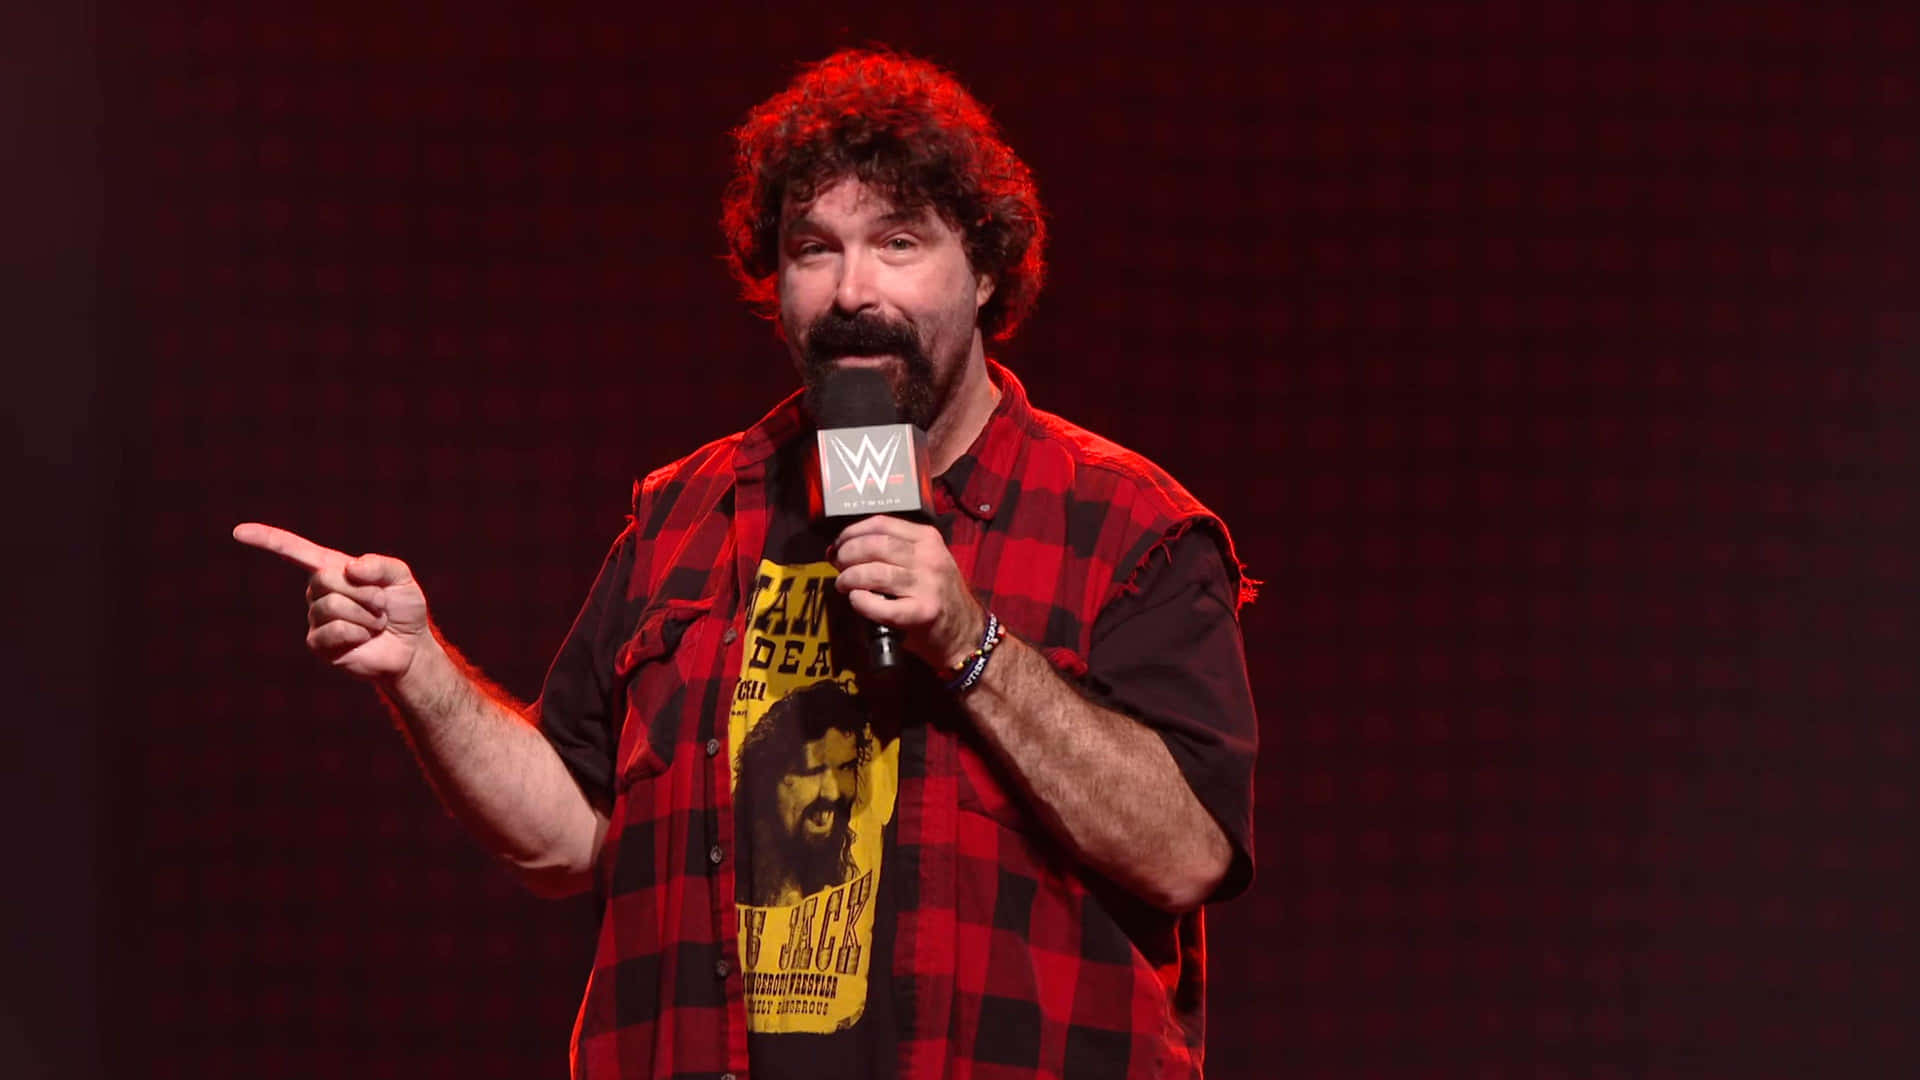 Mick Foley: A WWE Legend Discussing his Journey Wallpaper